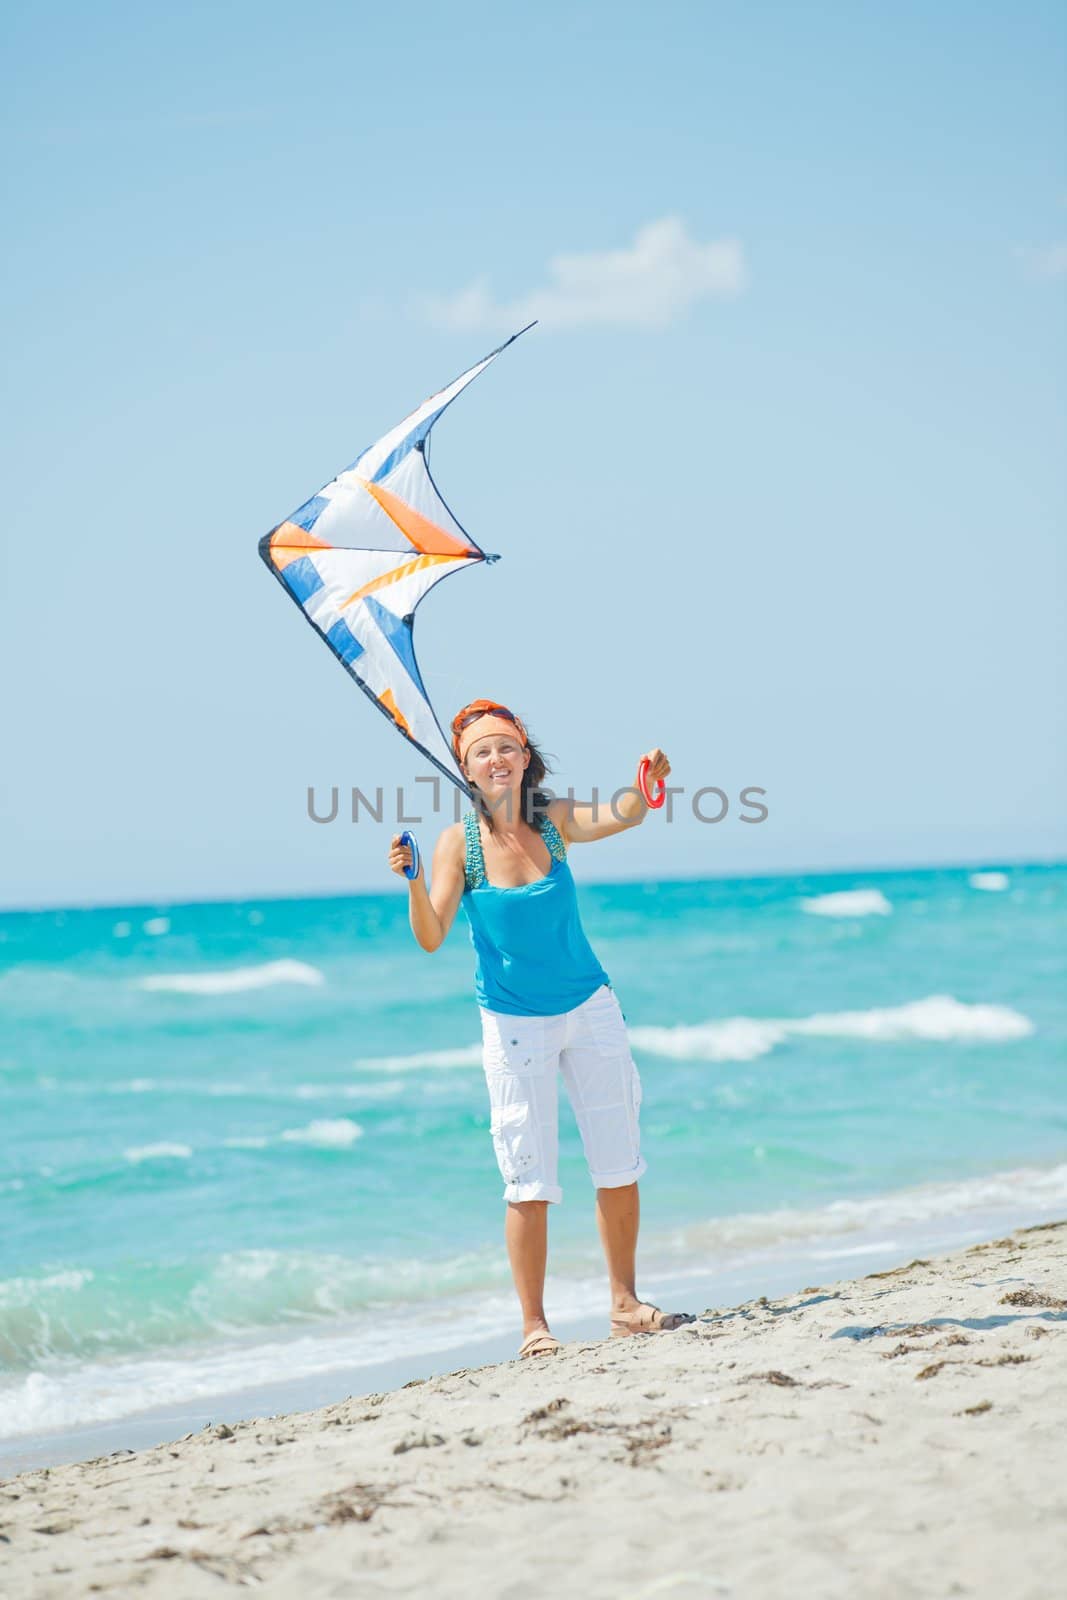 Young cute woman playing with a colorful kite on the tropical beach. Vertikal veiw